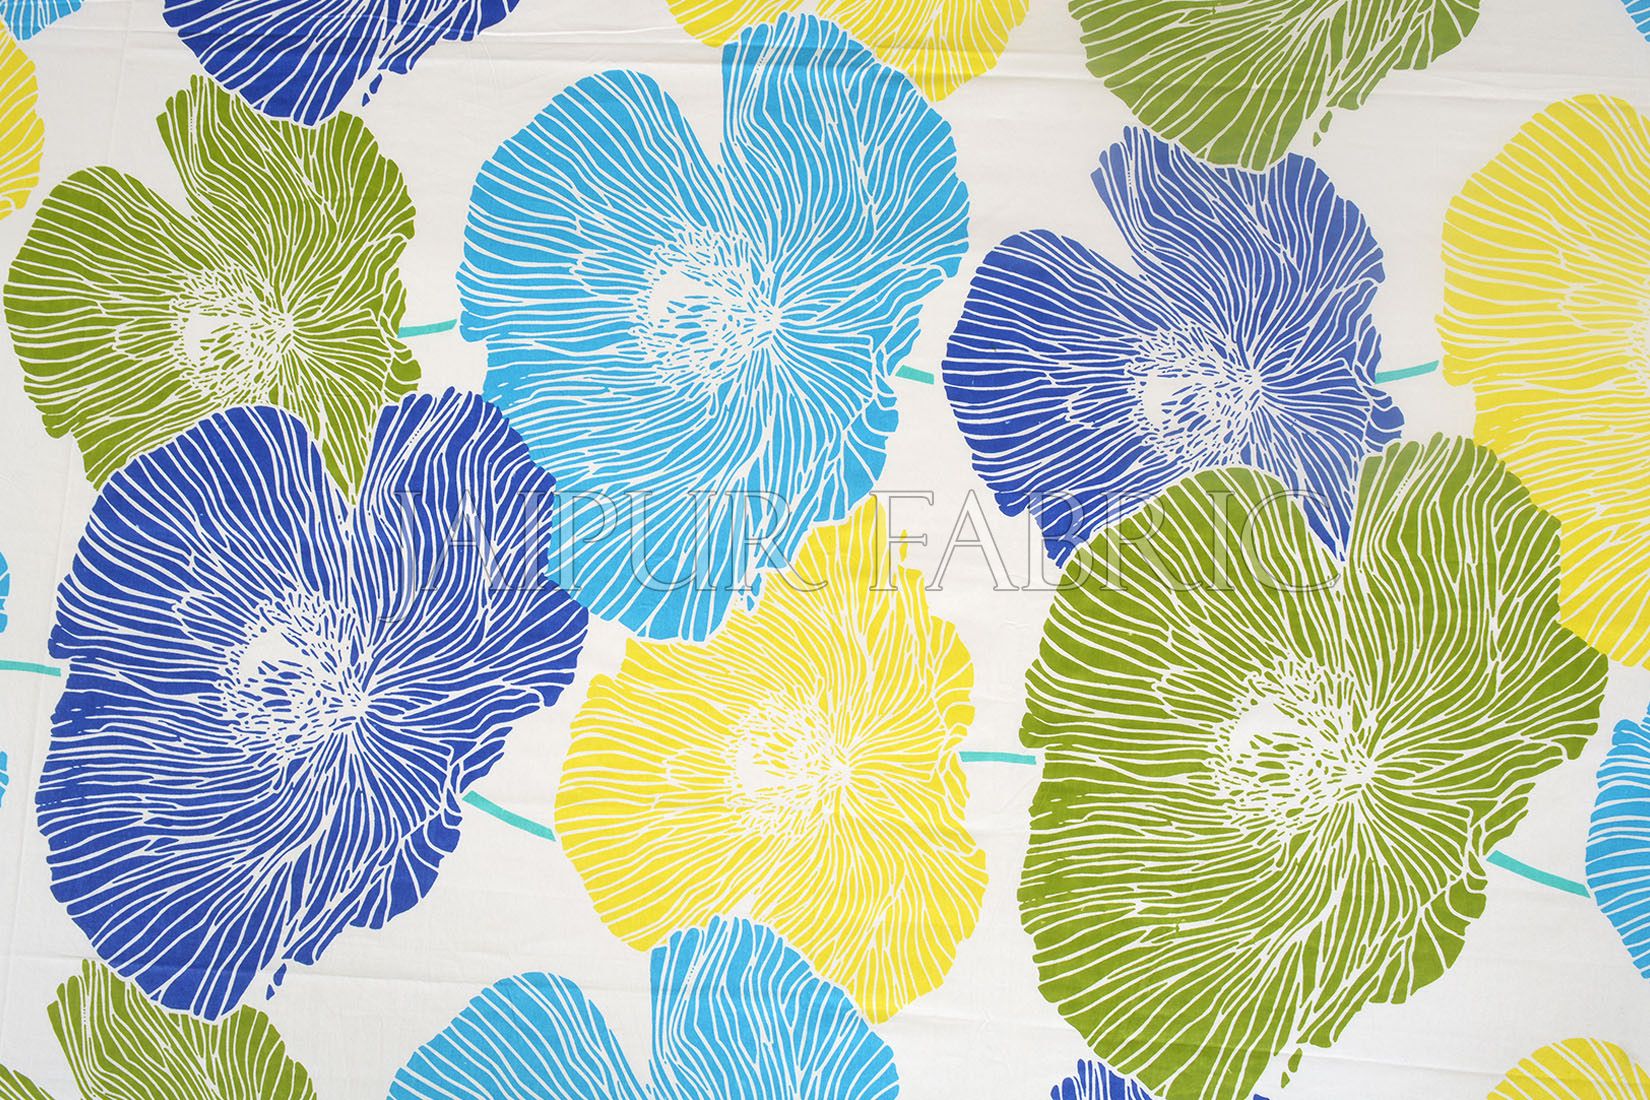 Yellow and Blue Floral Designer Cotton Double Bed Sheet